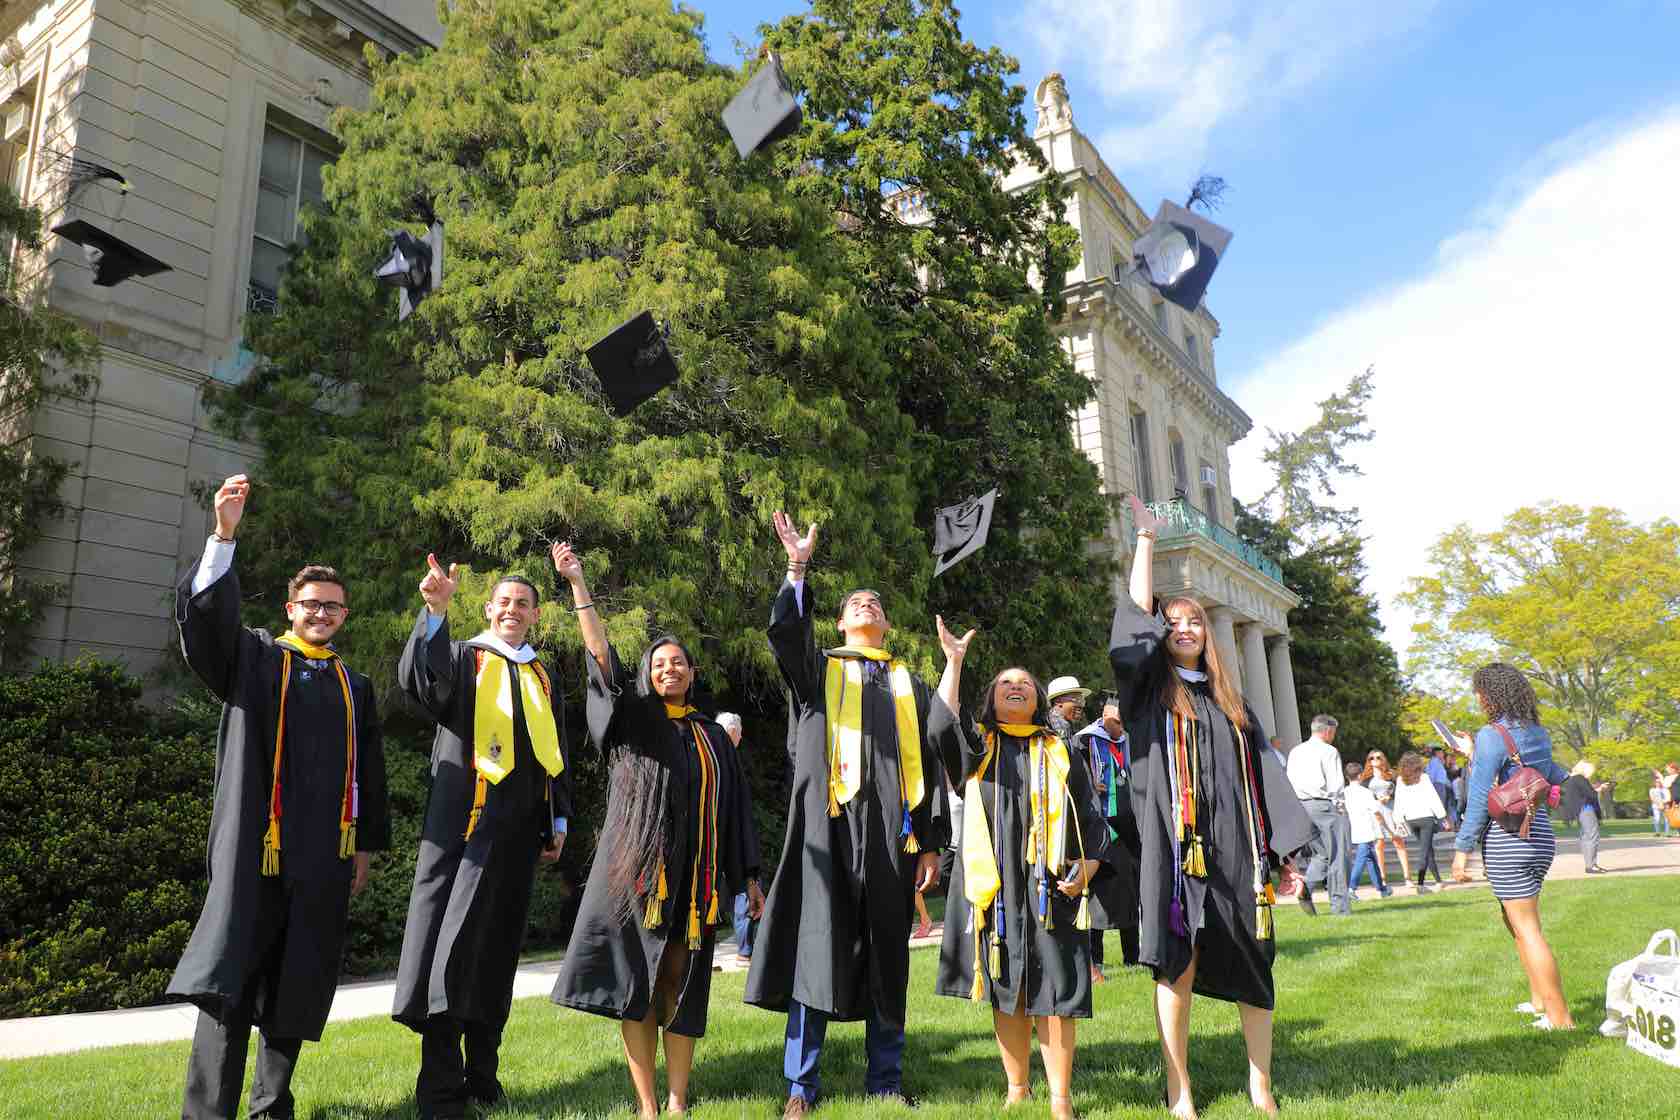 Photo of Monmouth University Graduating Students Throwing Mortarboards in the Air